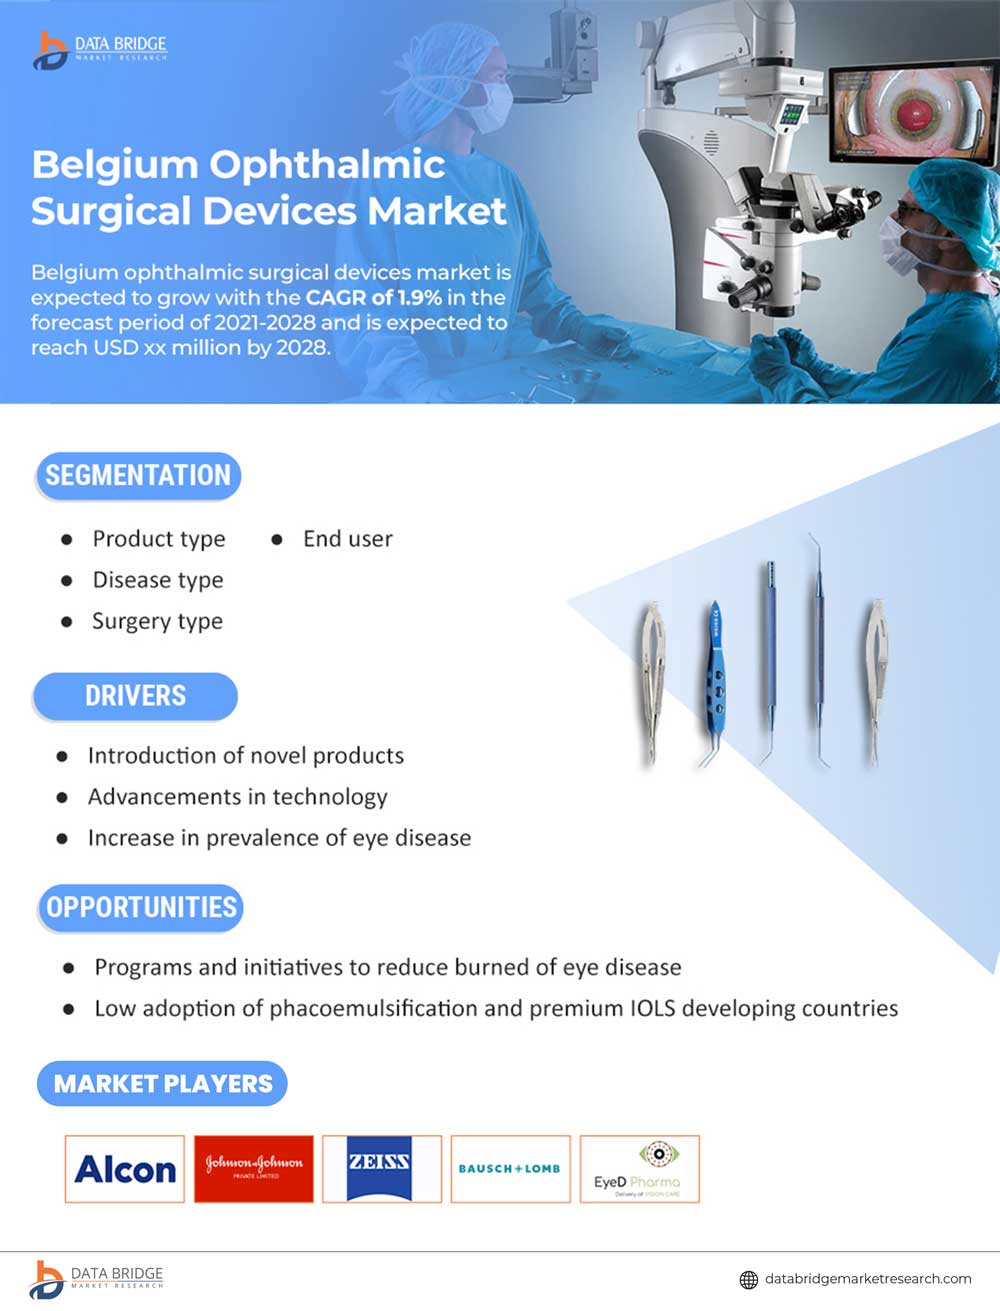 Belgium Ophthalmic Surgical Devices Market